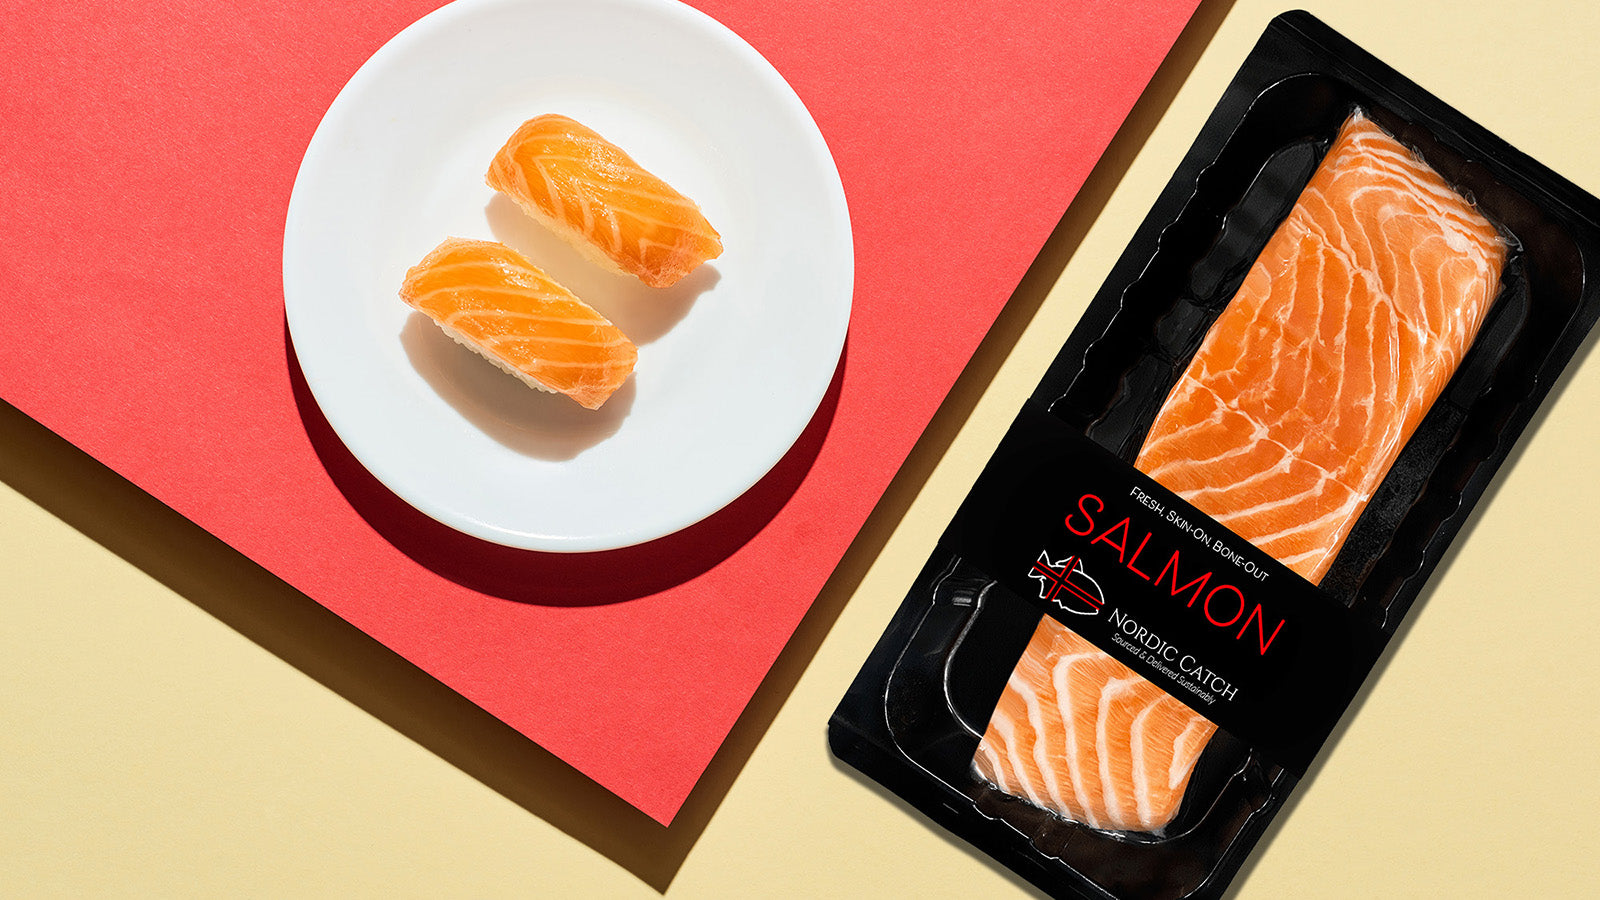 Perfect Nigiri Sushi Kit for 2 - From Iceland Delivered Fresh – Nordic Catch